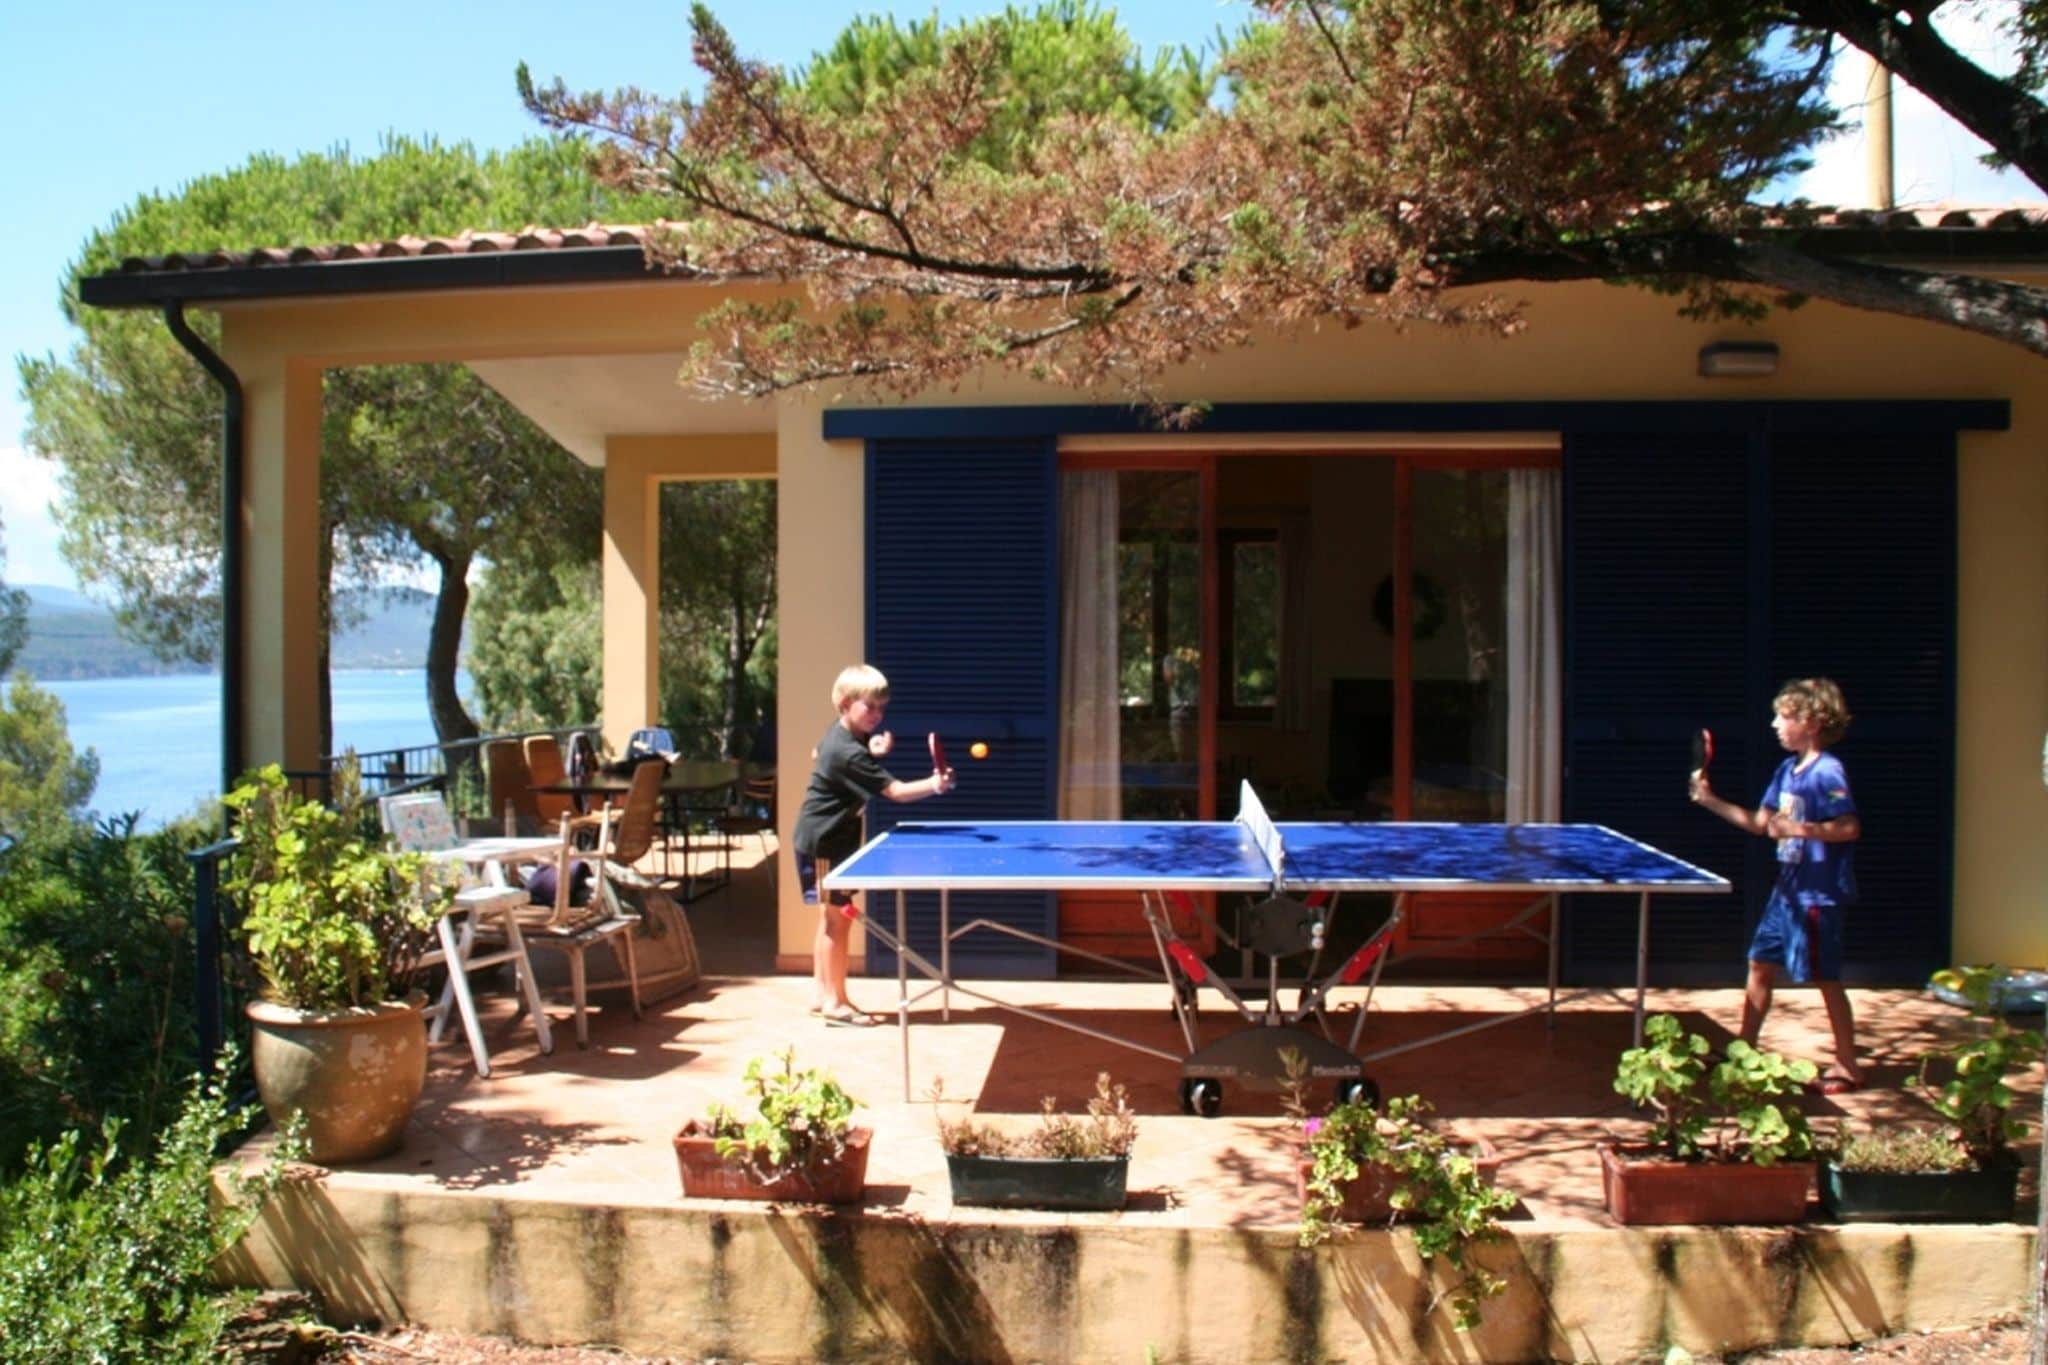 House with direct access and private terrace at sea, only 10min from Capoliveri